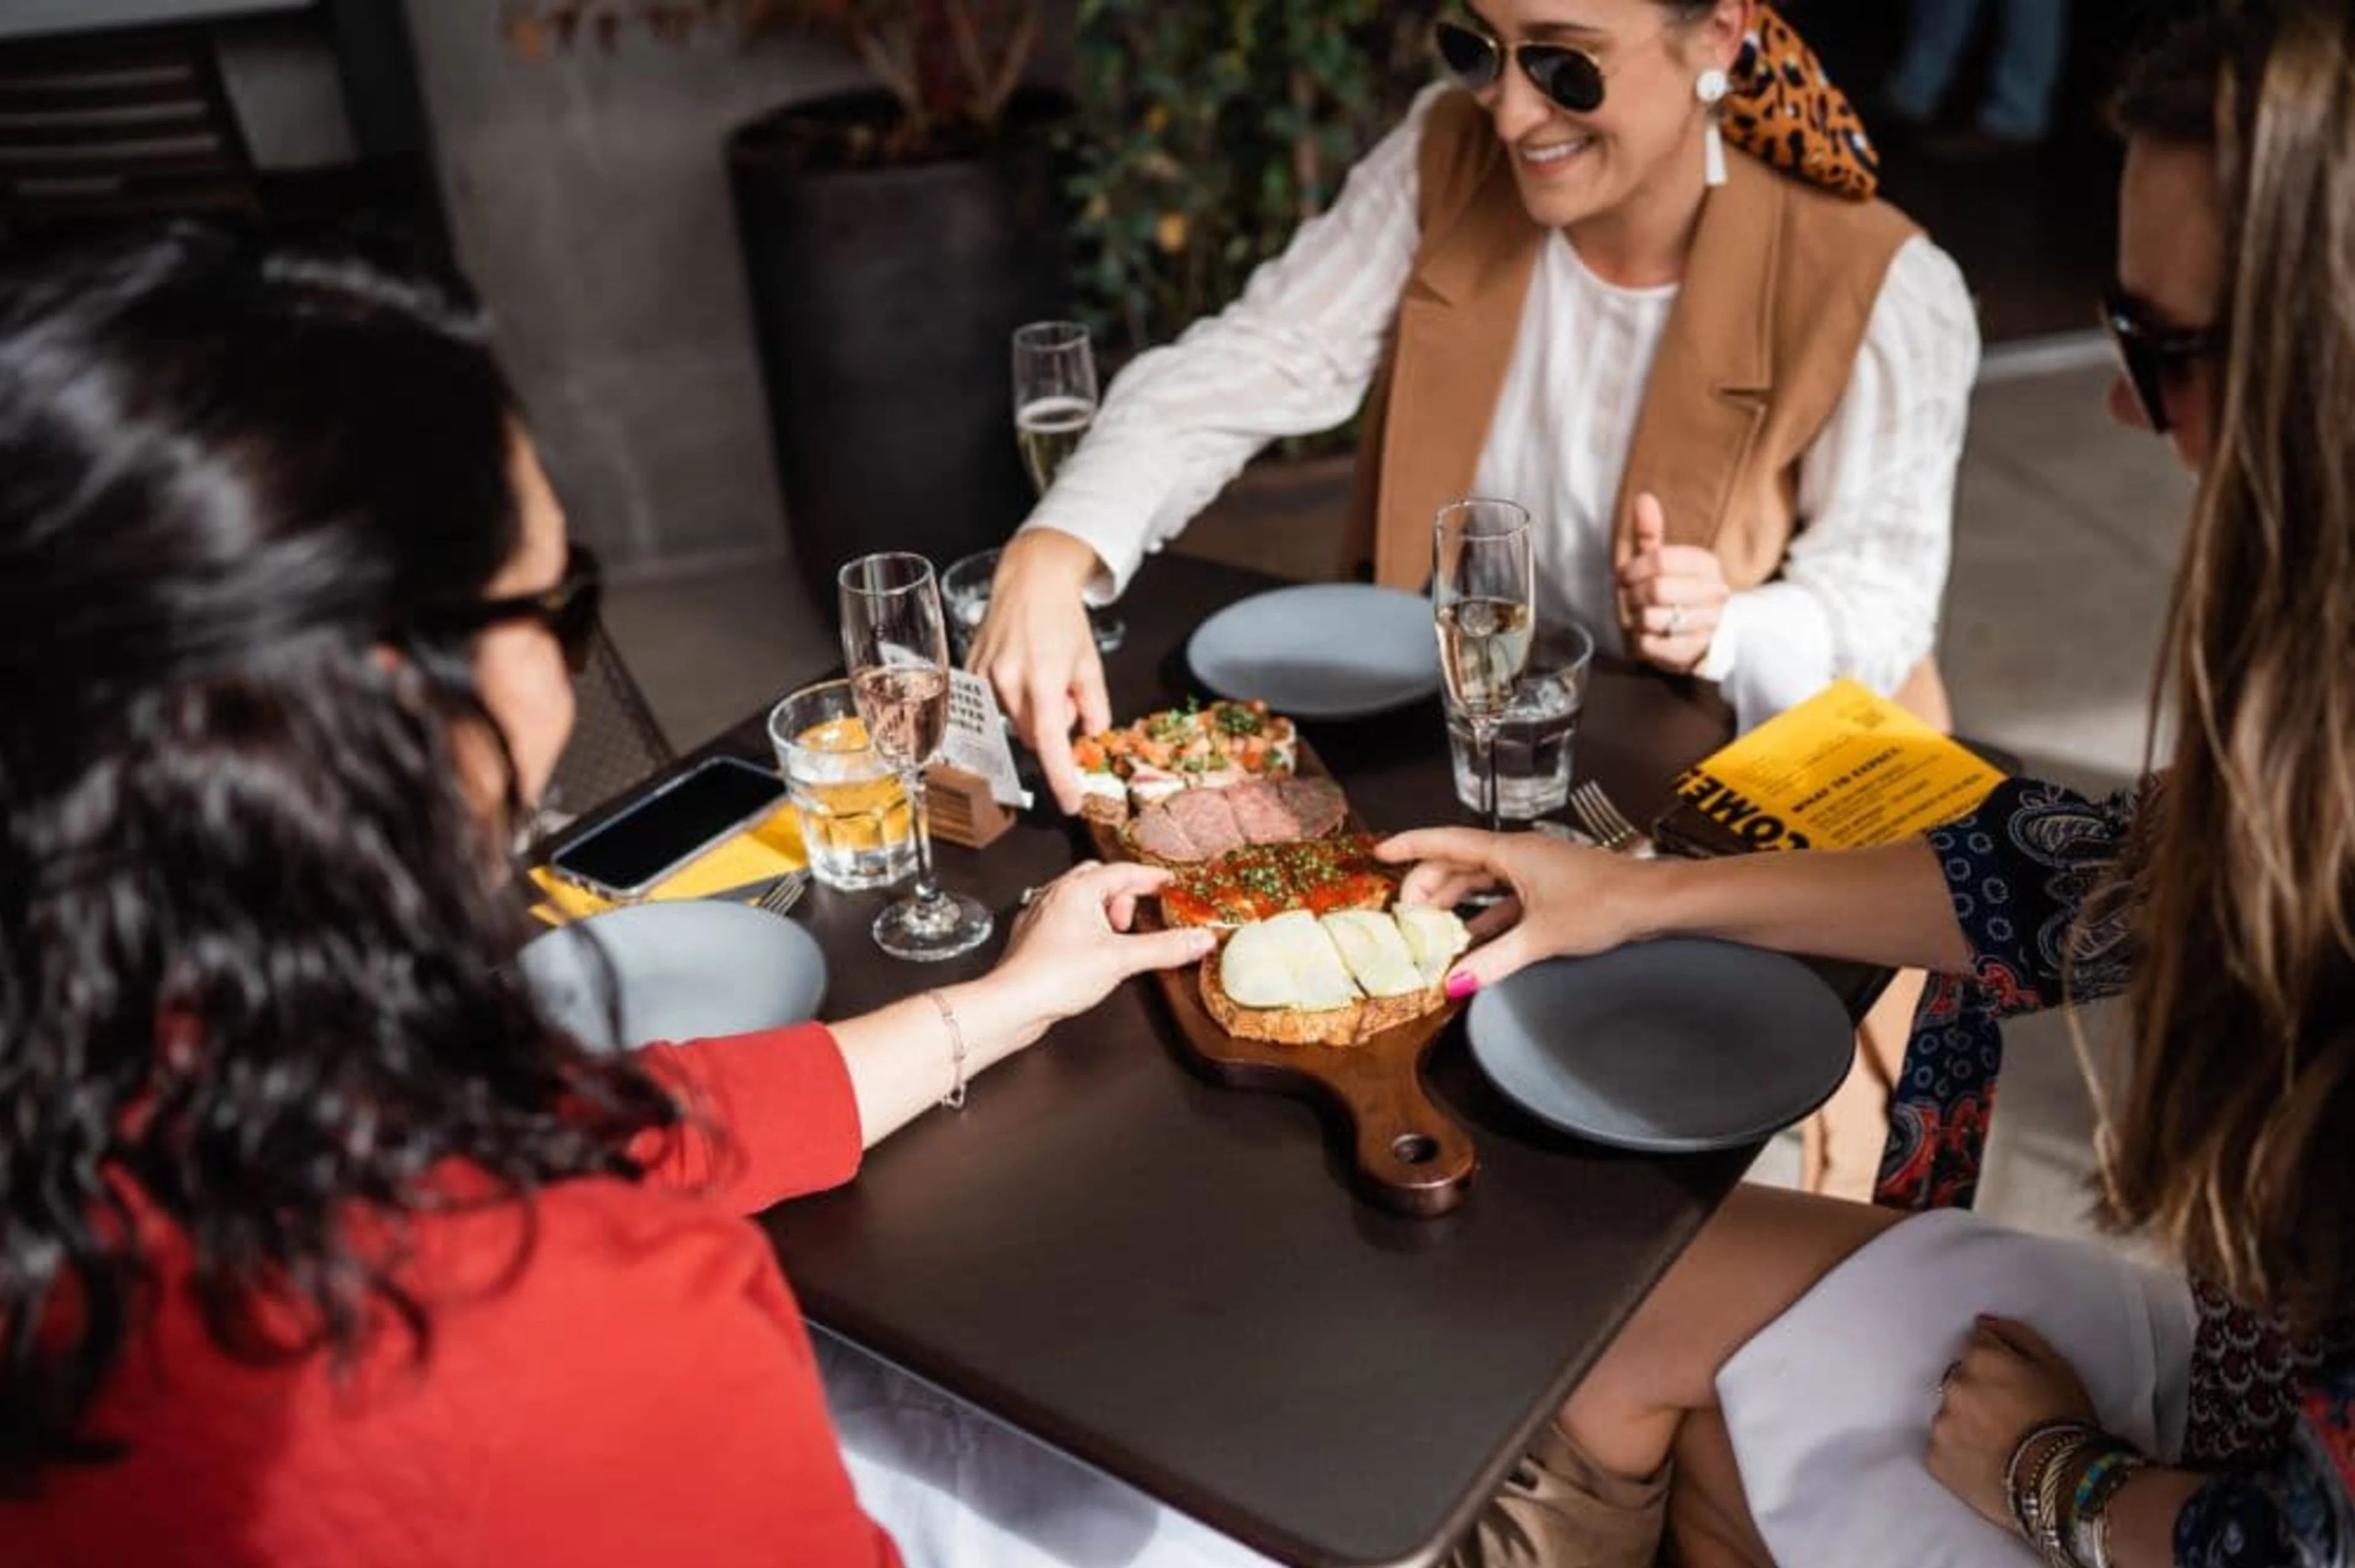 Three people sitting at a table sharing a wooden food board.